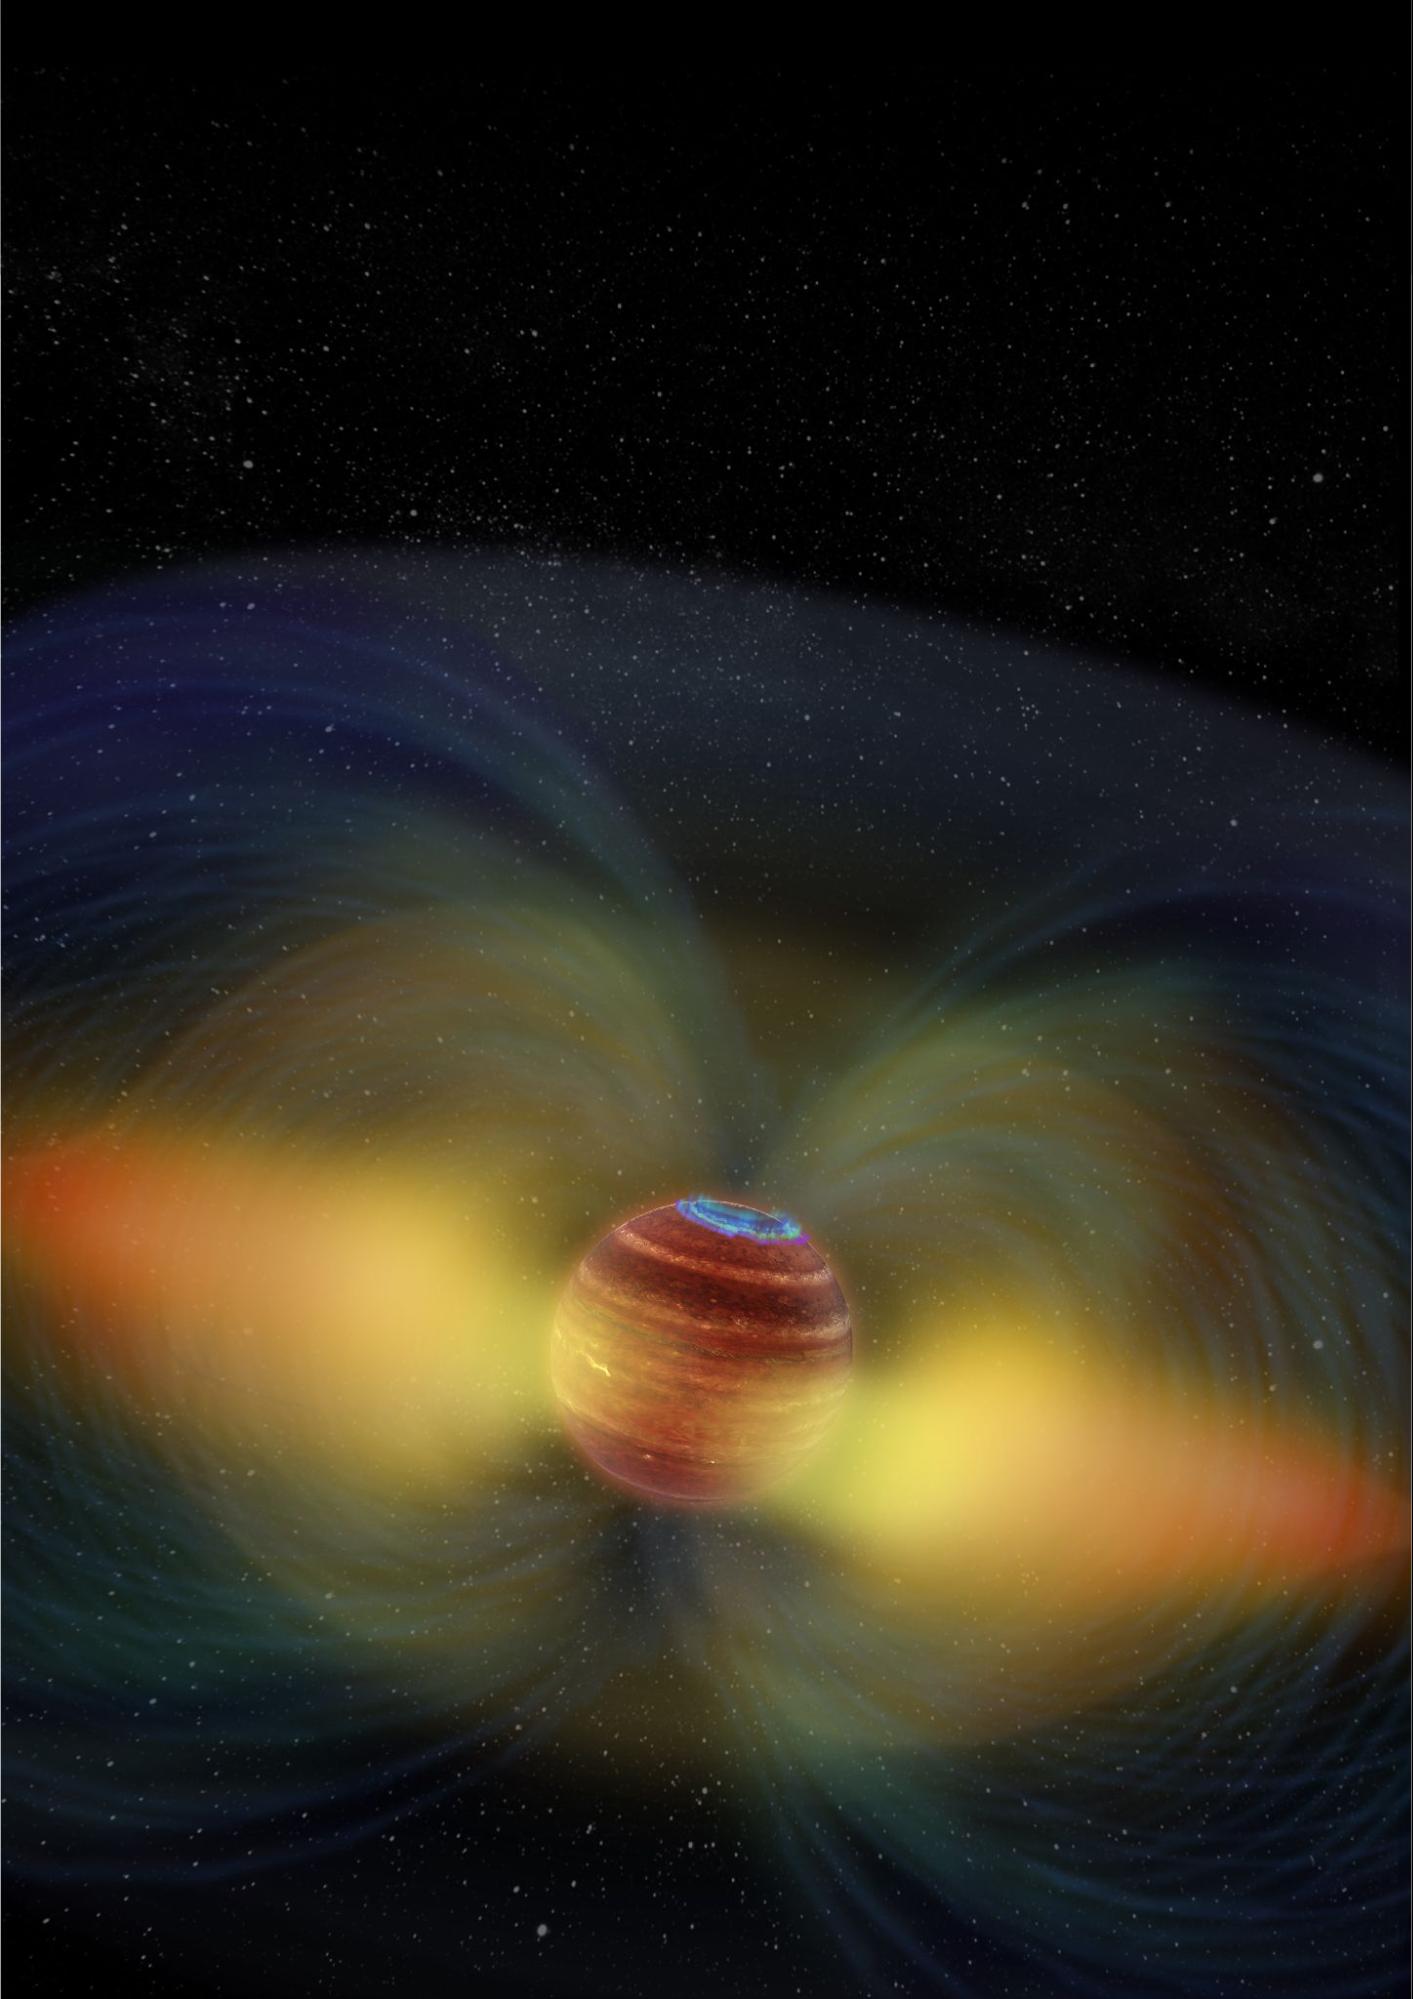 Astronomers Discover The First Known Extrasolar Radiation Belt - SpaceRef